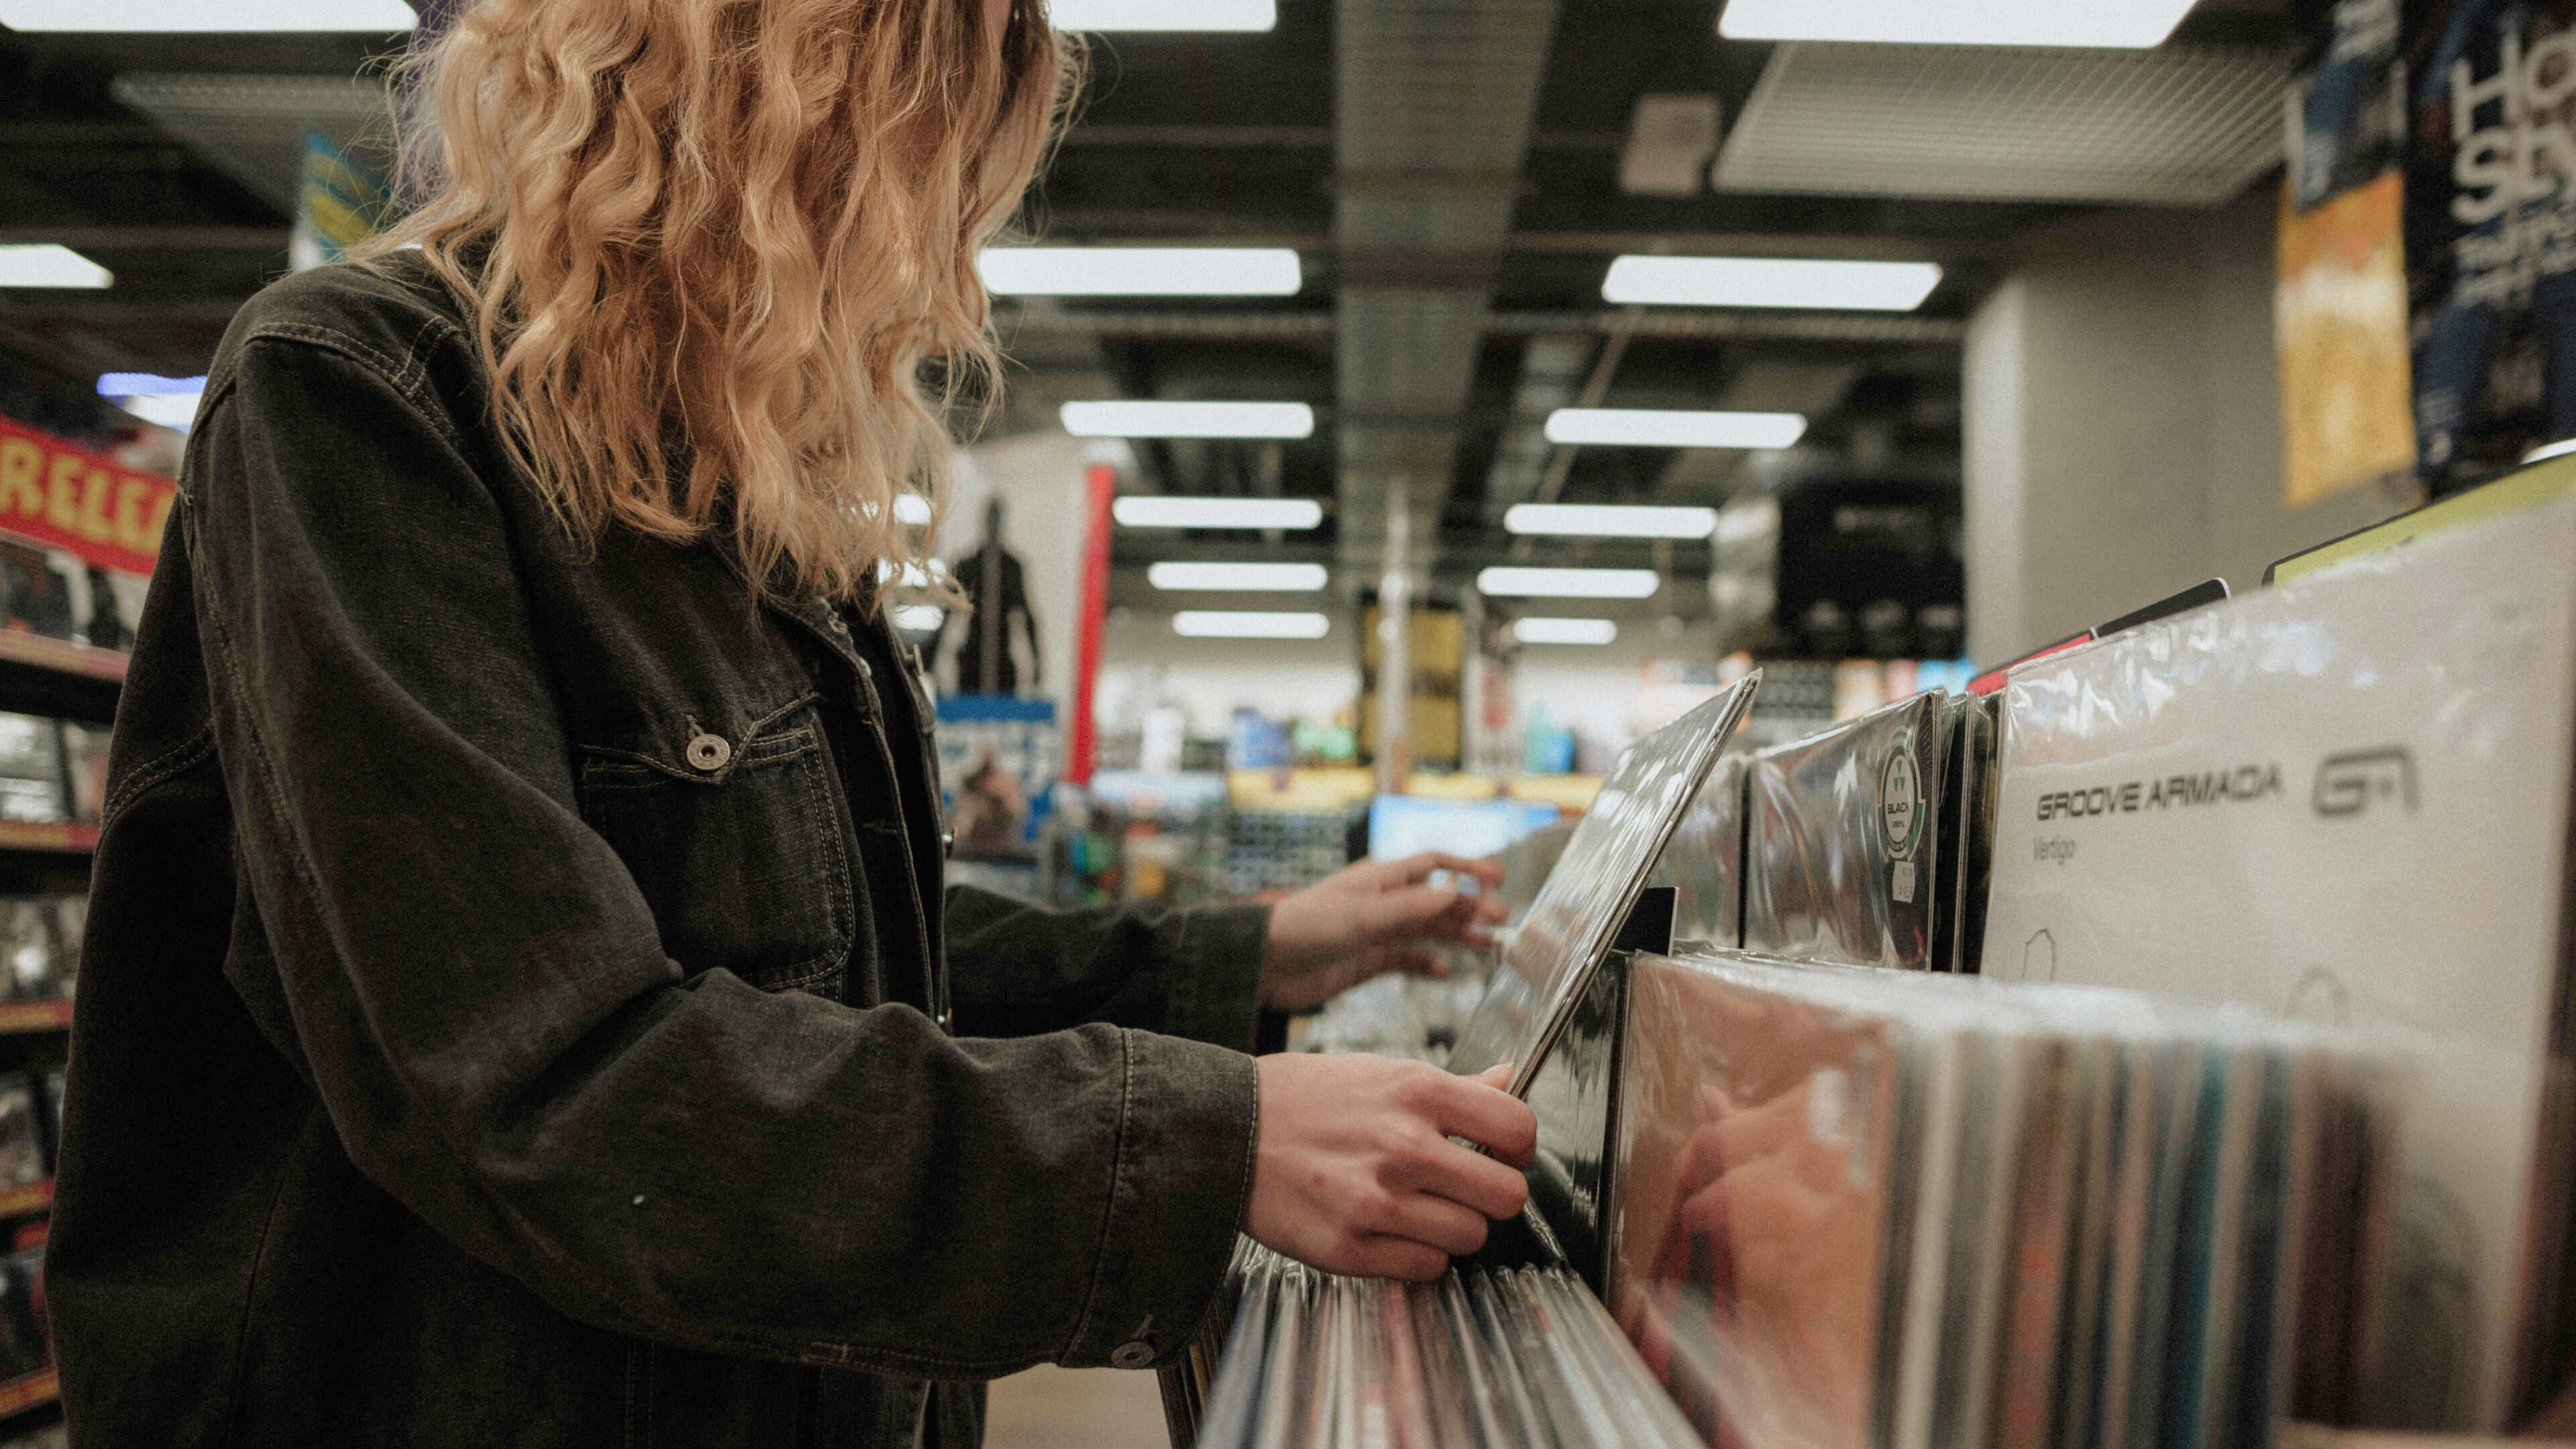 Vinyl records are sorted by genre, as shown here, in a classic record store